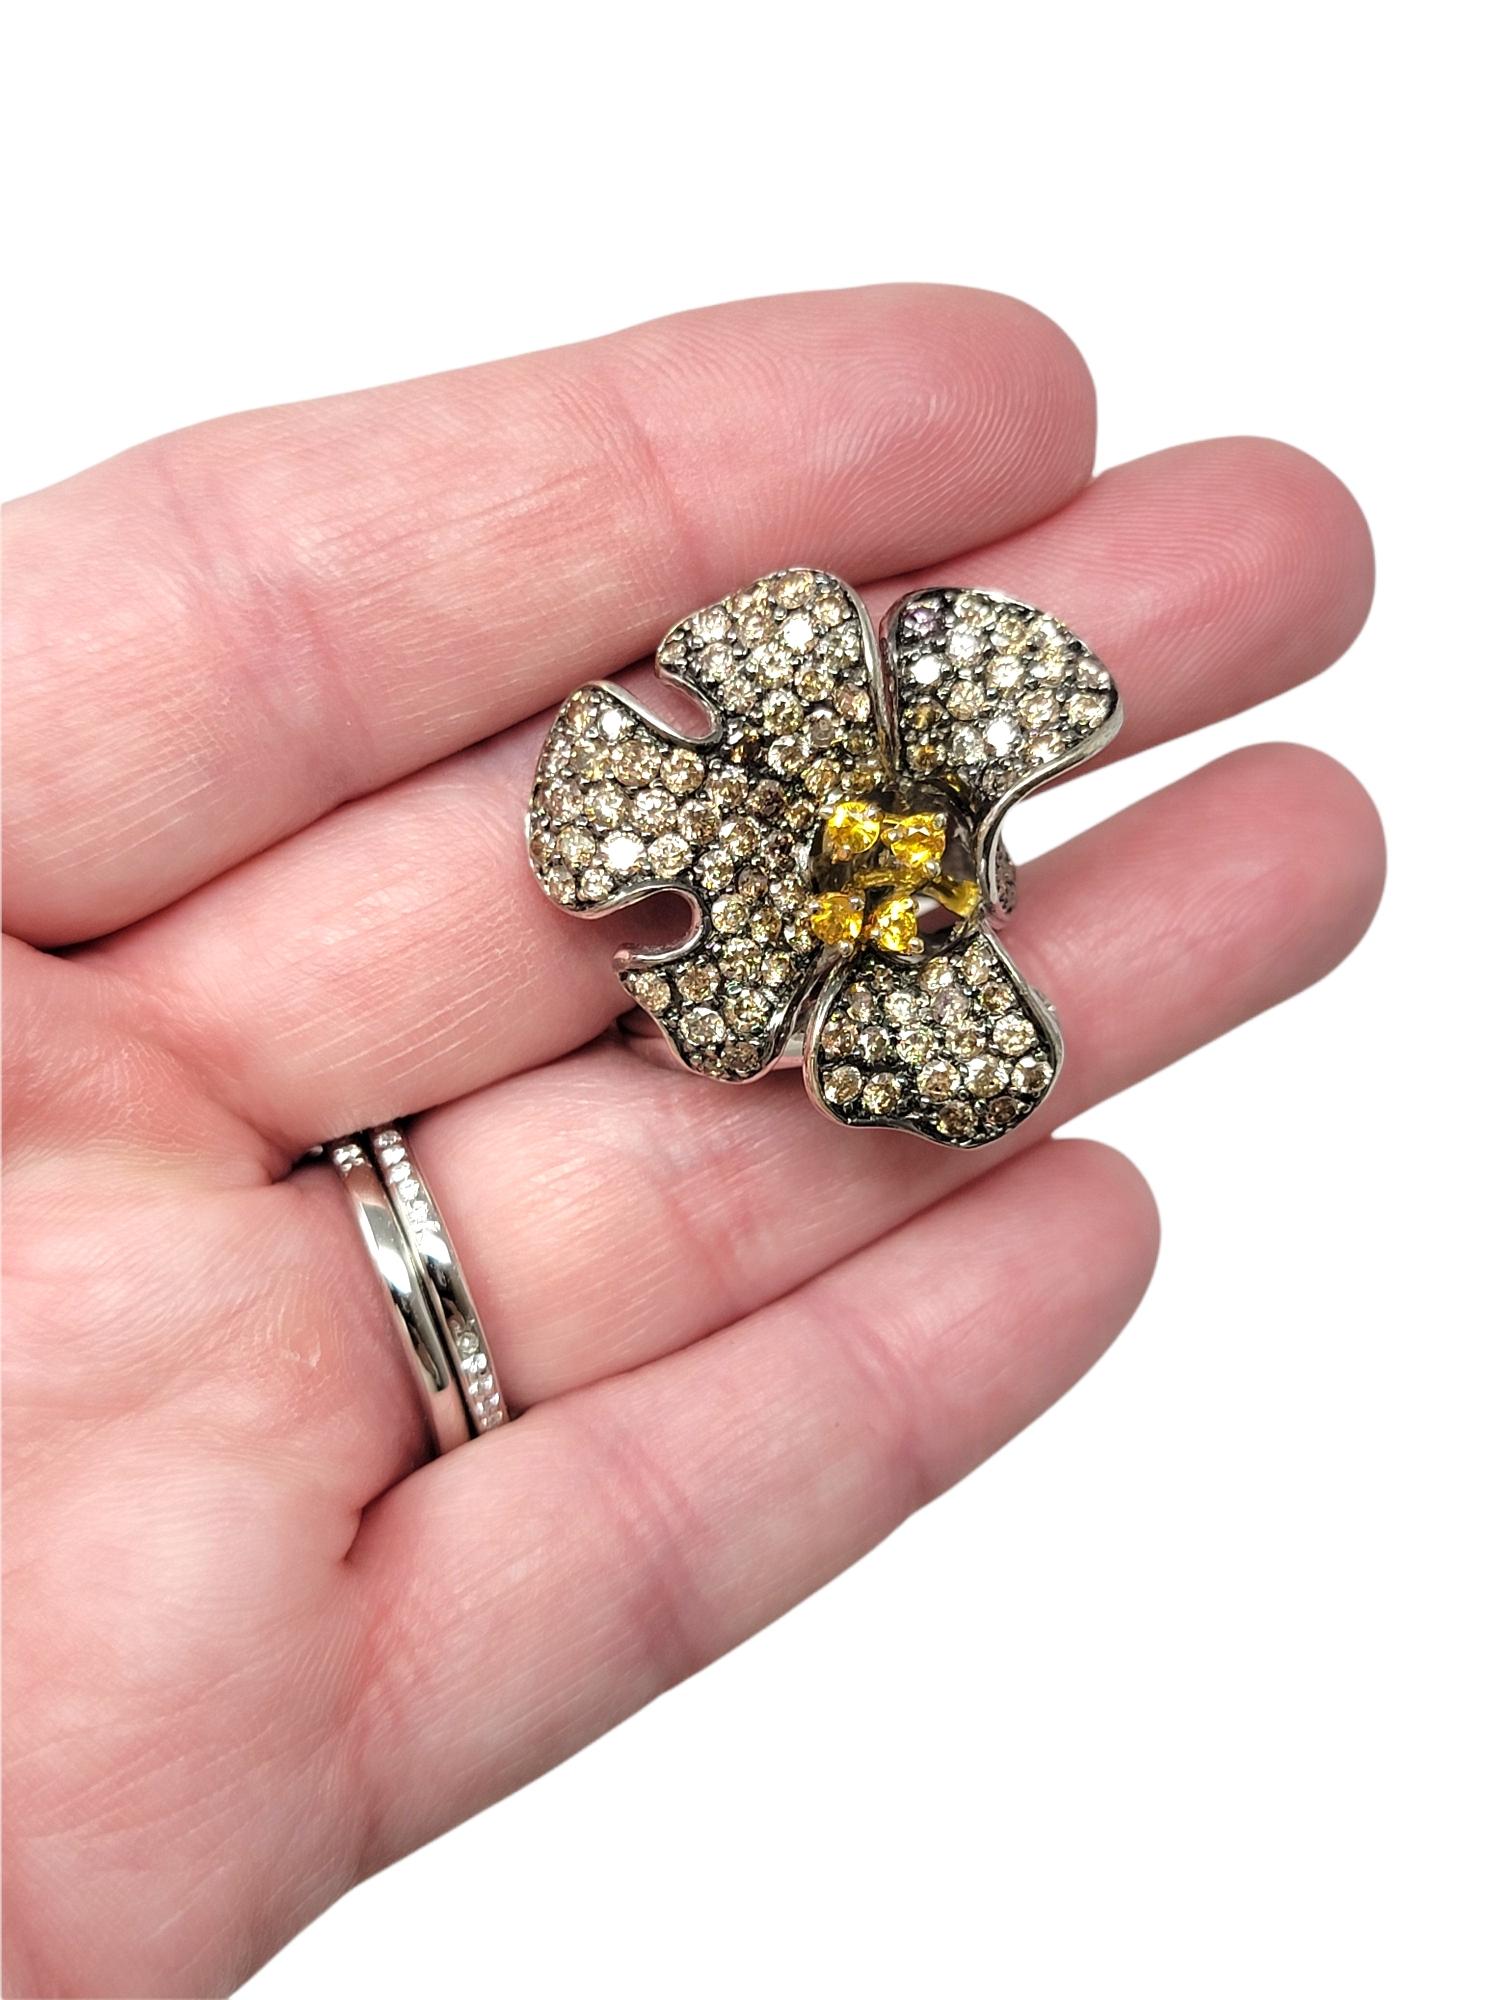 3D Pave Diamond Orchid Flower Ring with Orange Sapphire Accents in White Gold For Sale 8